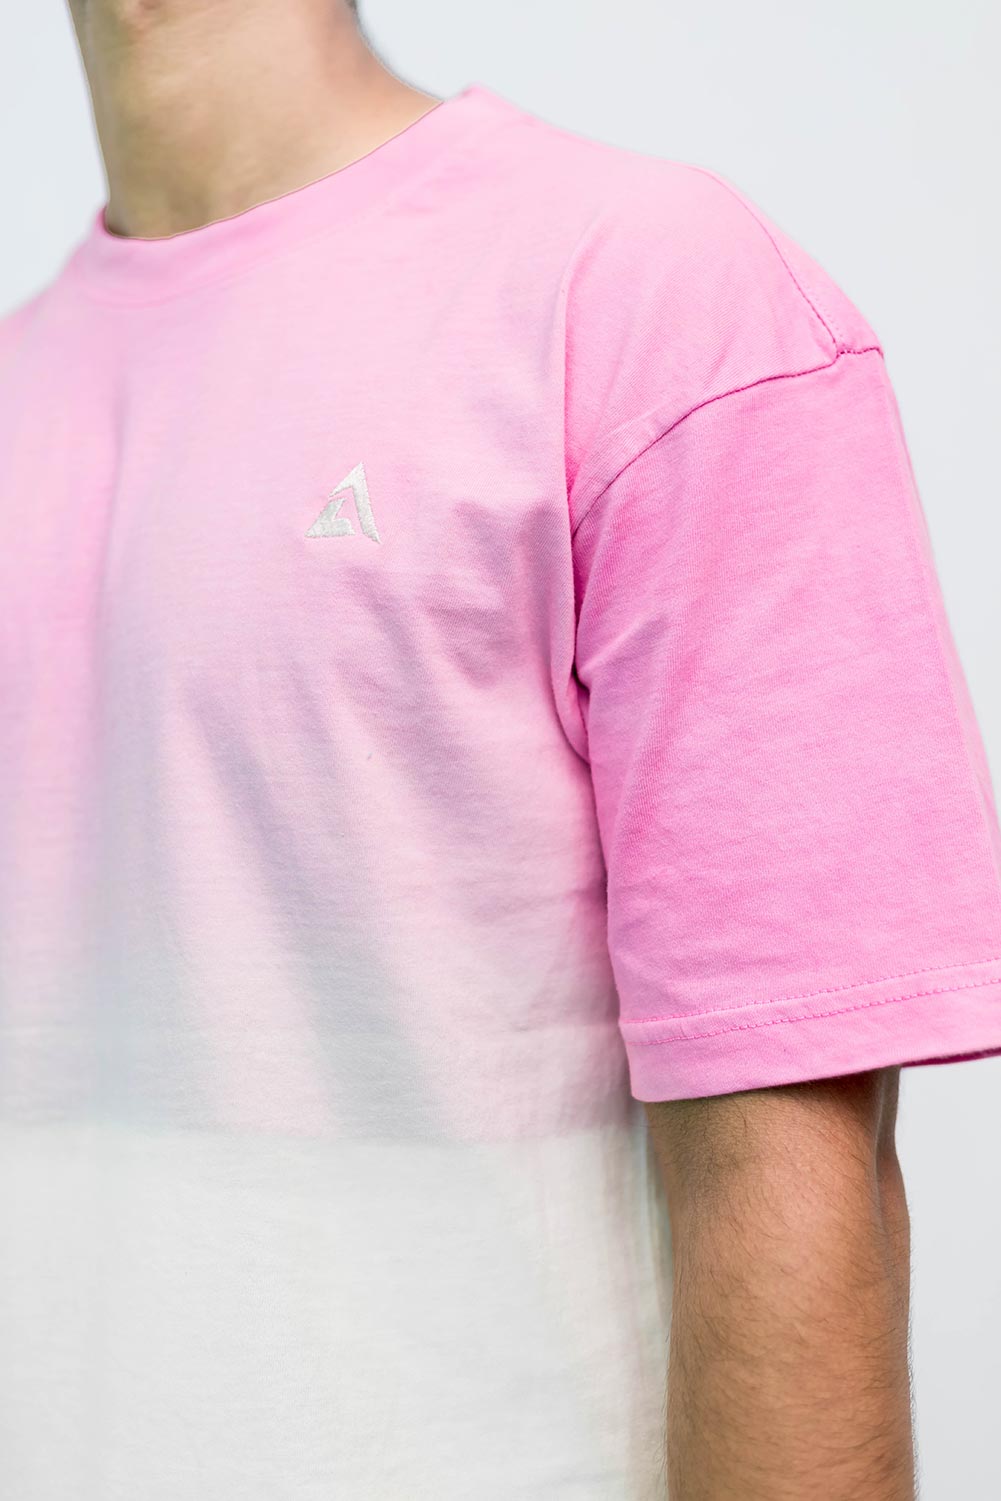 Dip-Dyed Unisex T-shirt in Pink Color - Lahori Athleisure